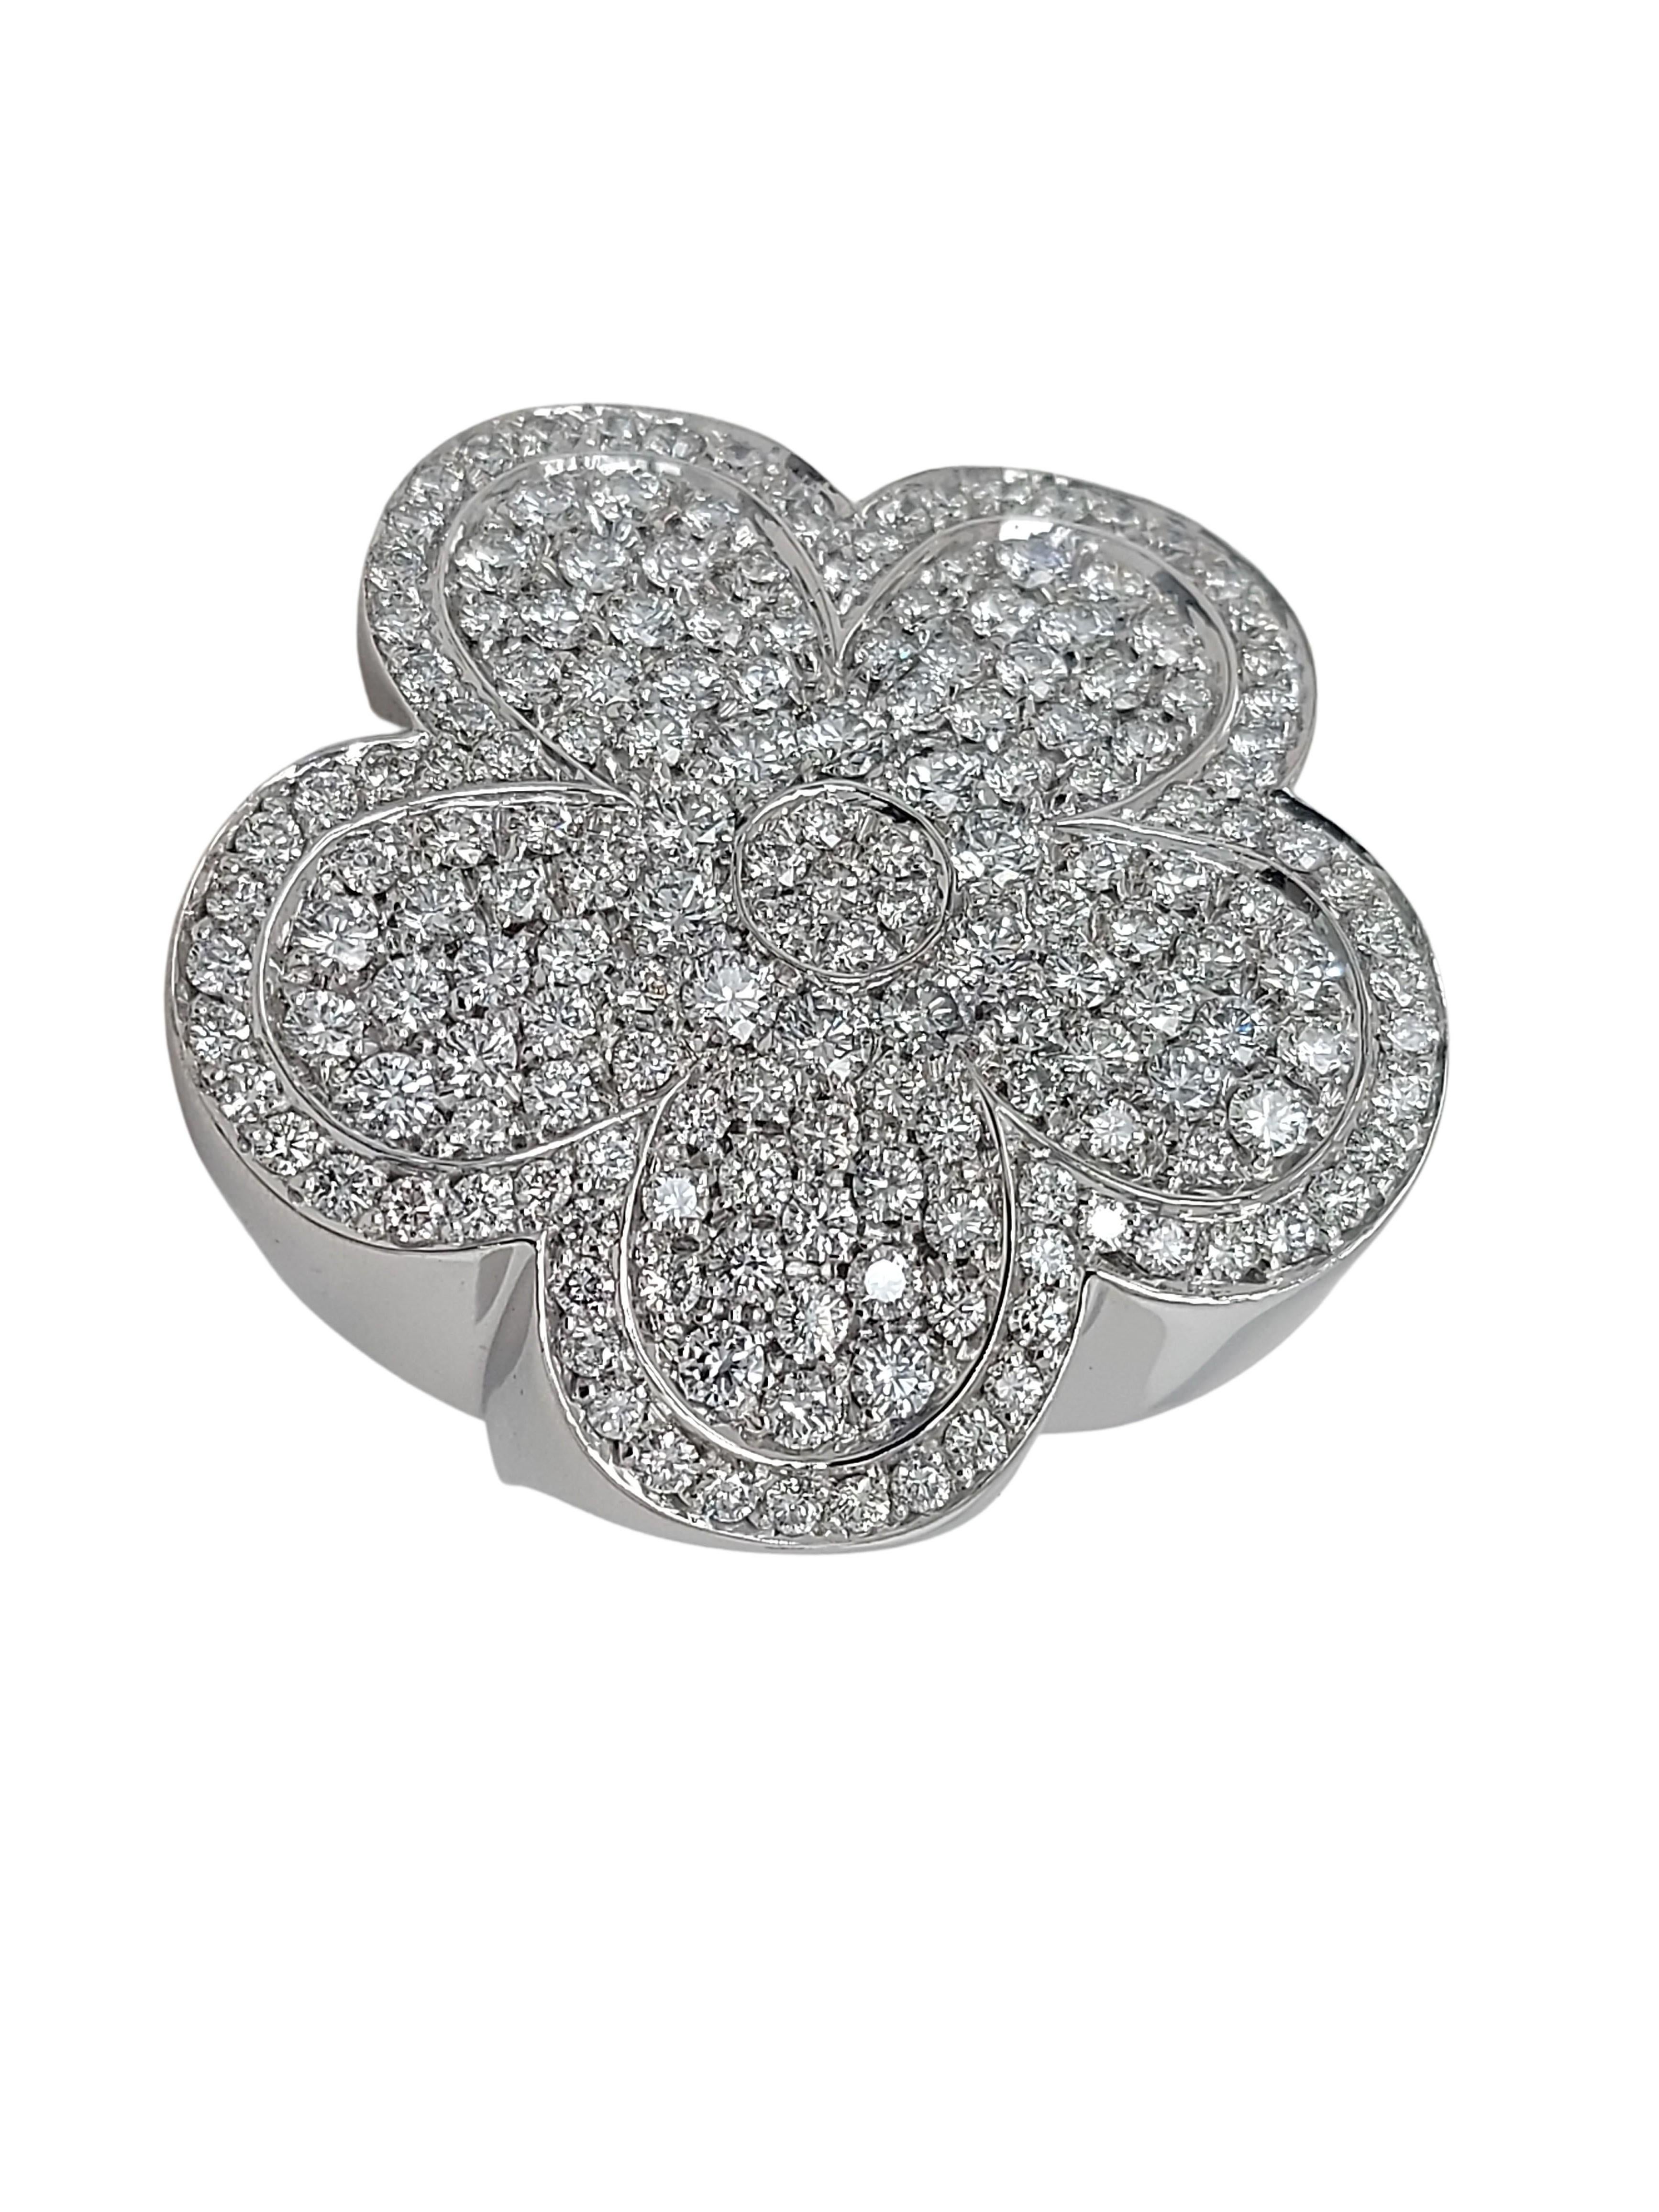 Artisan 18kt White Gold Flower Shape Ring With Brilliant Cut Diamonds, Crivelli For Sale